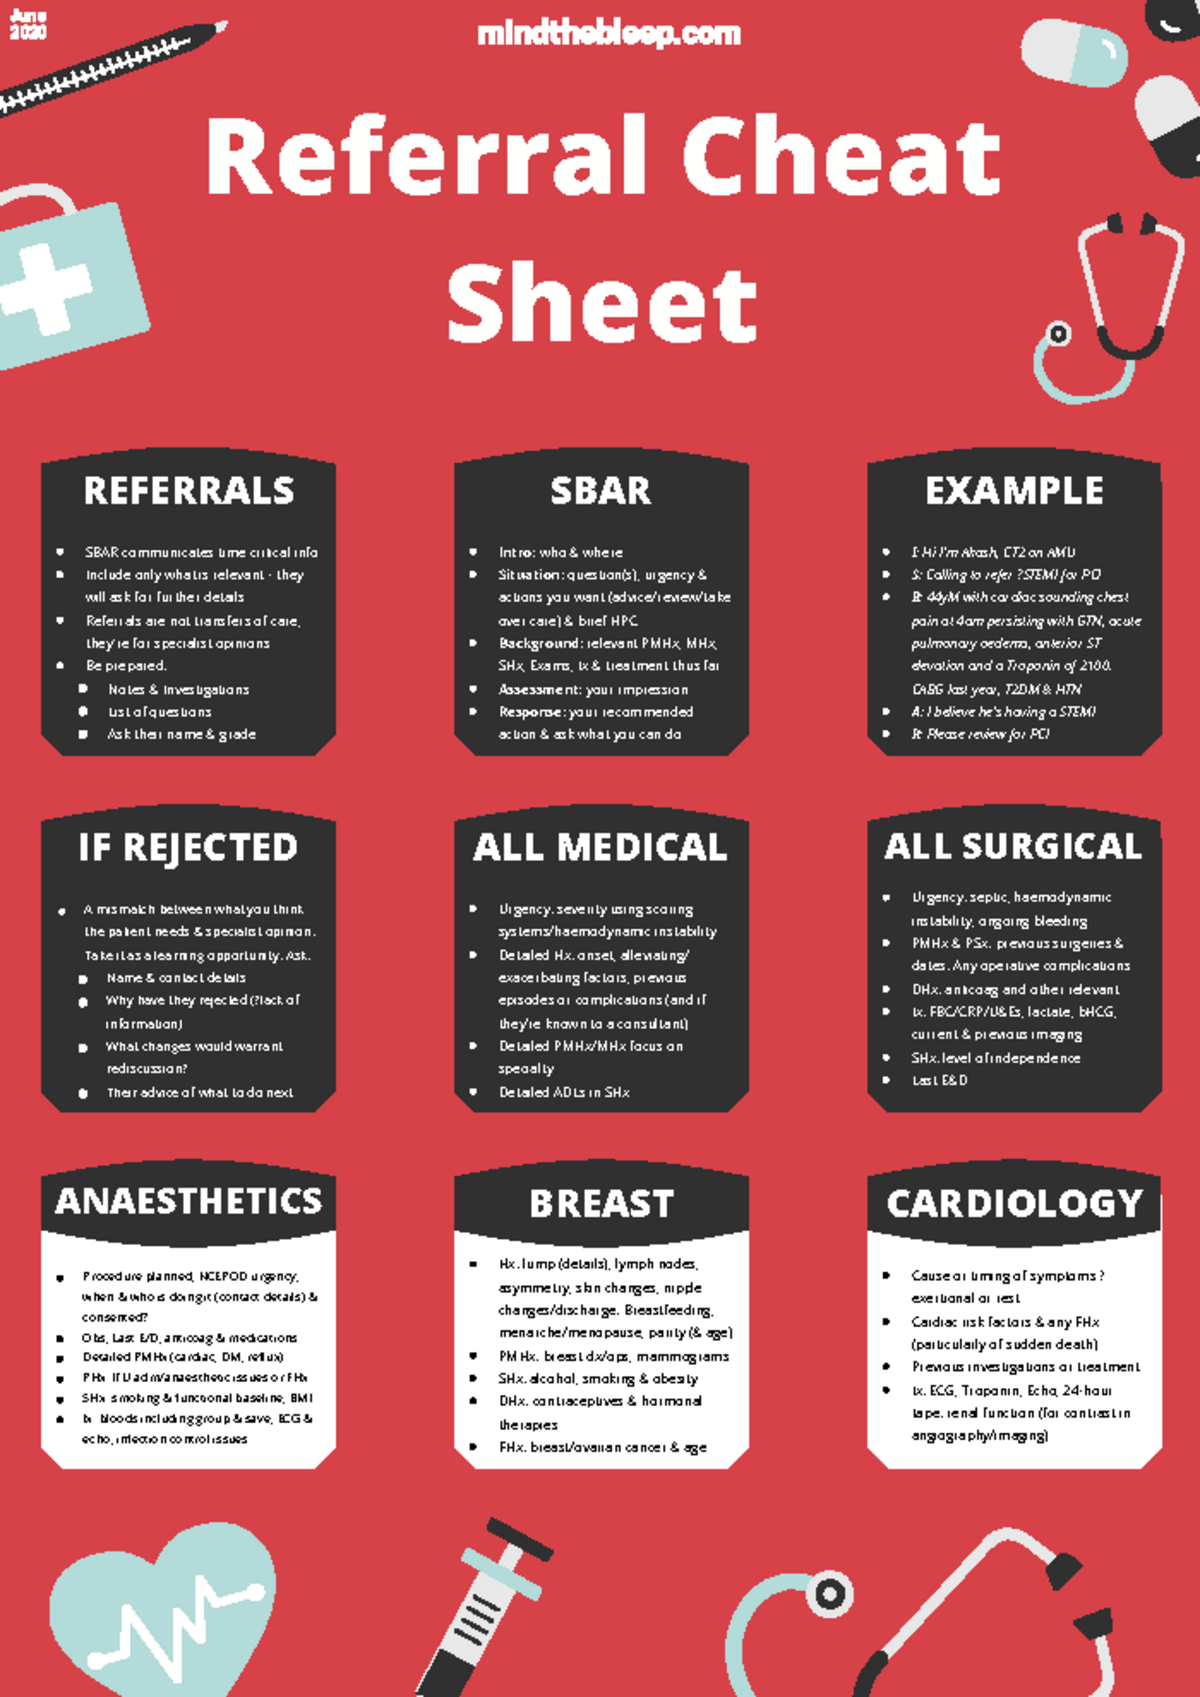 Referral Cheat Sheet June 2020 Referrals Sbar Communicates Time Critical Info Include Only 3749